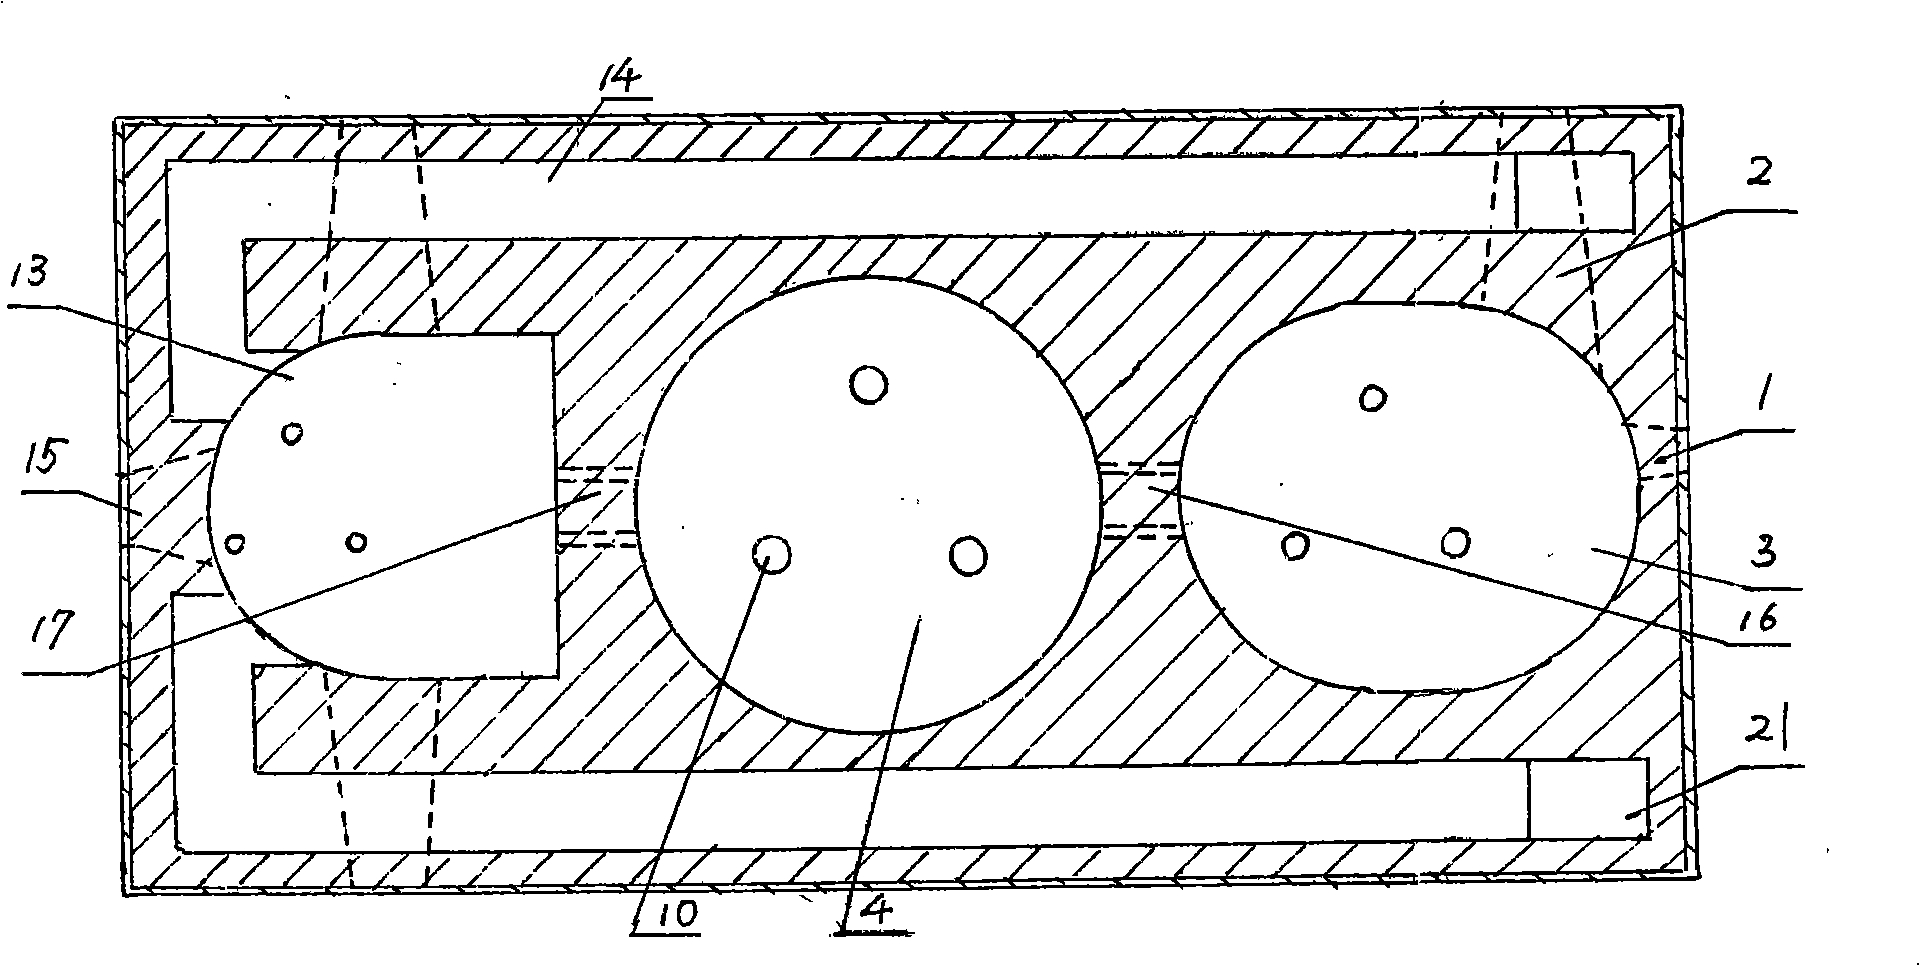 Process and apparatus for processing municipal sewage sludge by using nepheline nucleated glass